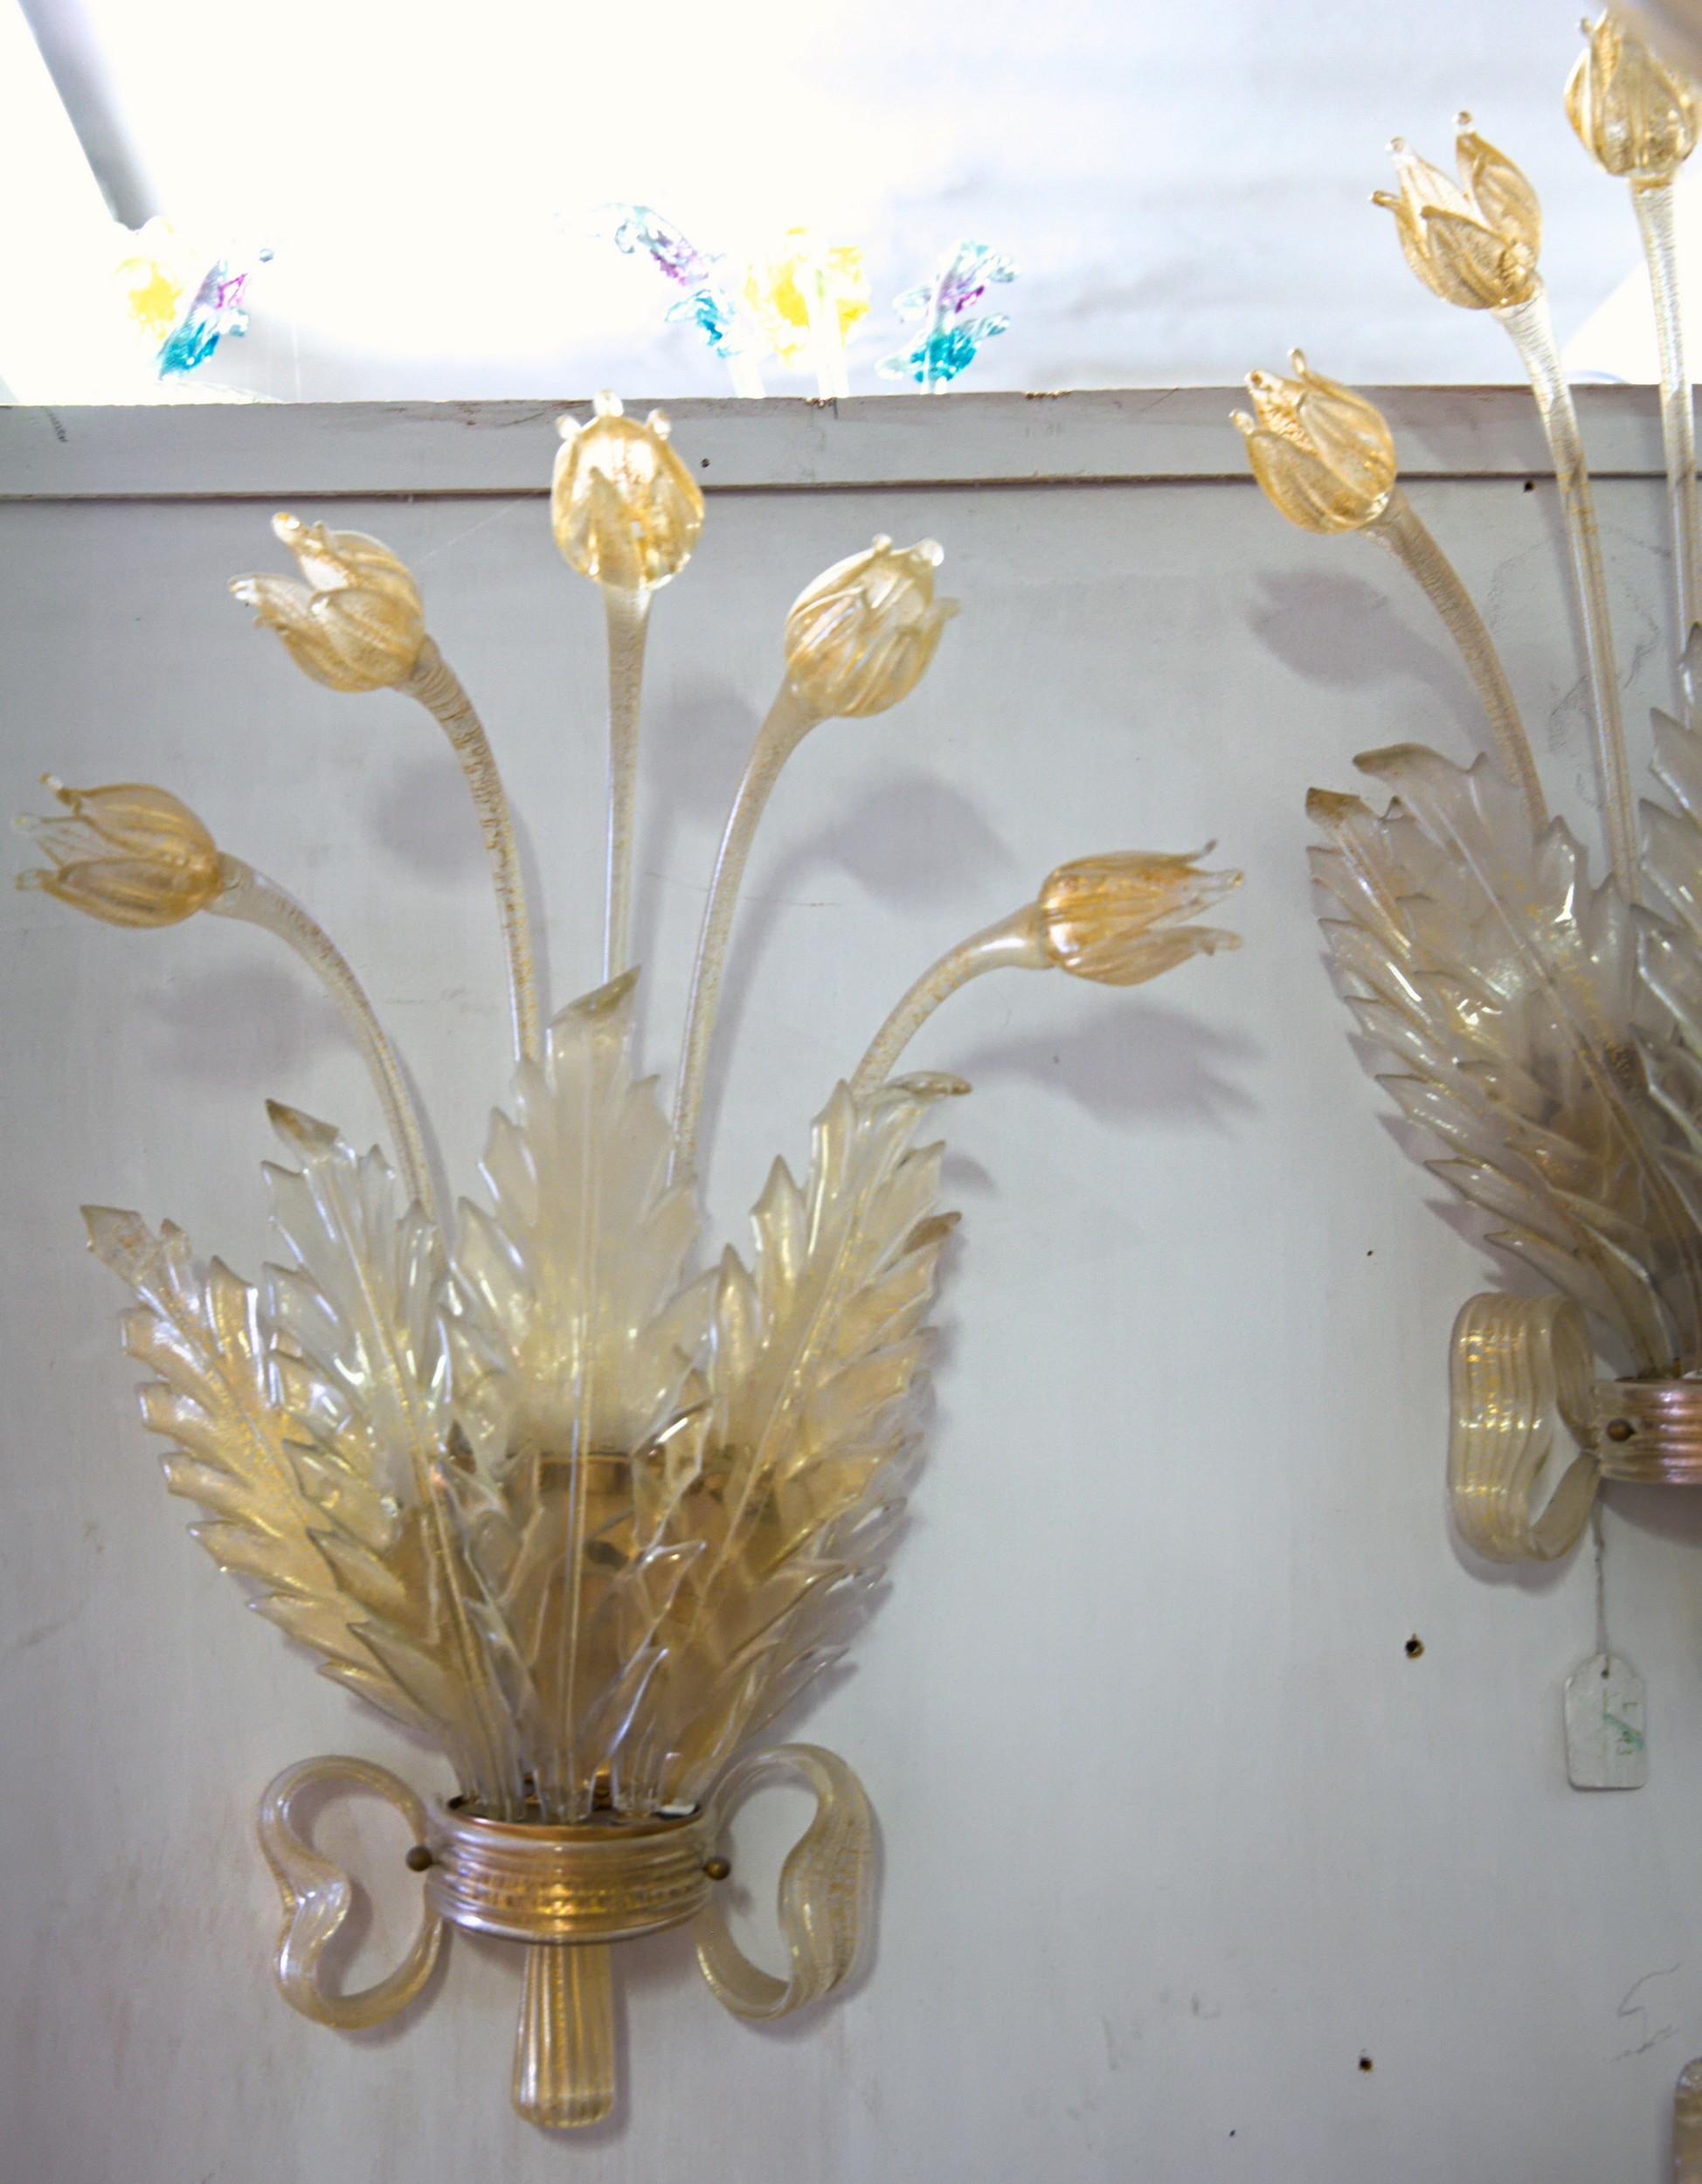 Seguso Pair of Sconces, Murano Glass with Gold Leaf, Tulips, Leaves and Bow Deco For Sale 2